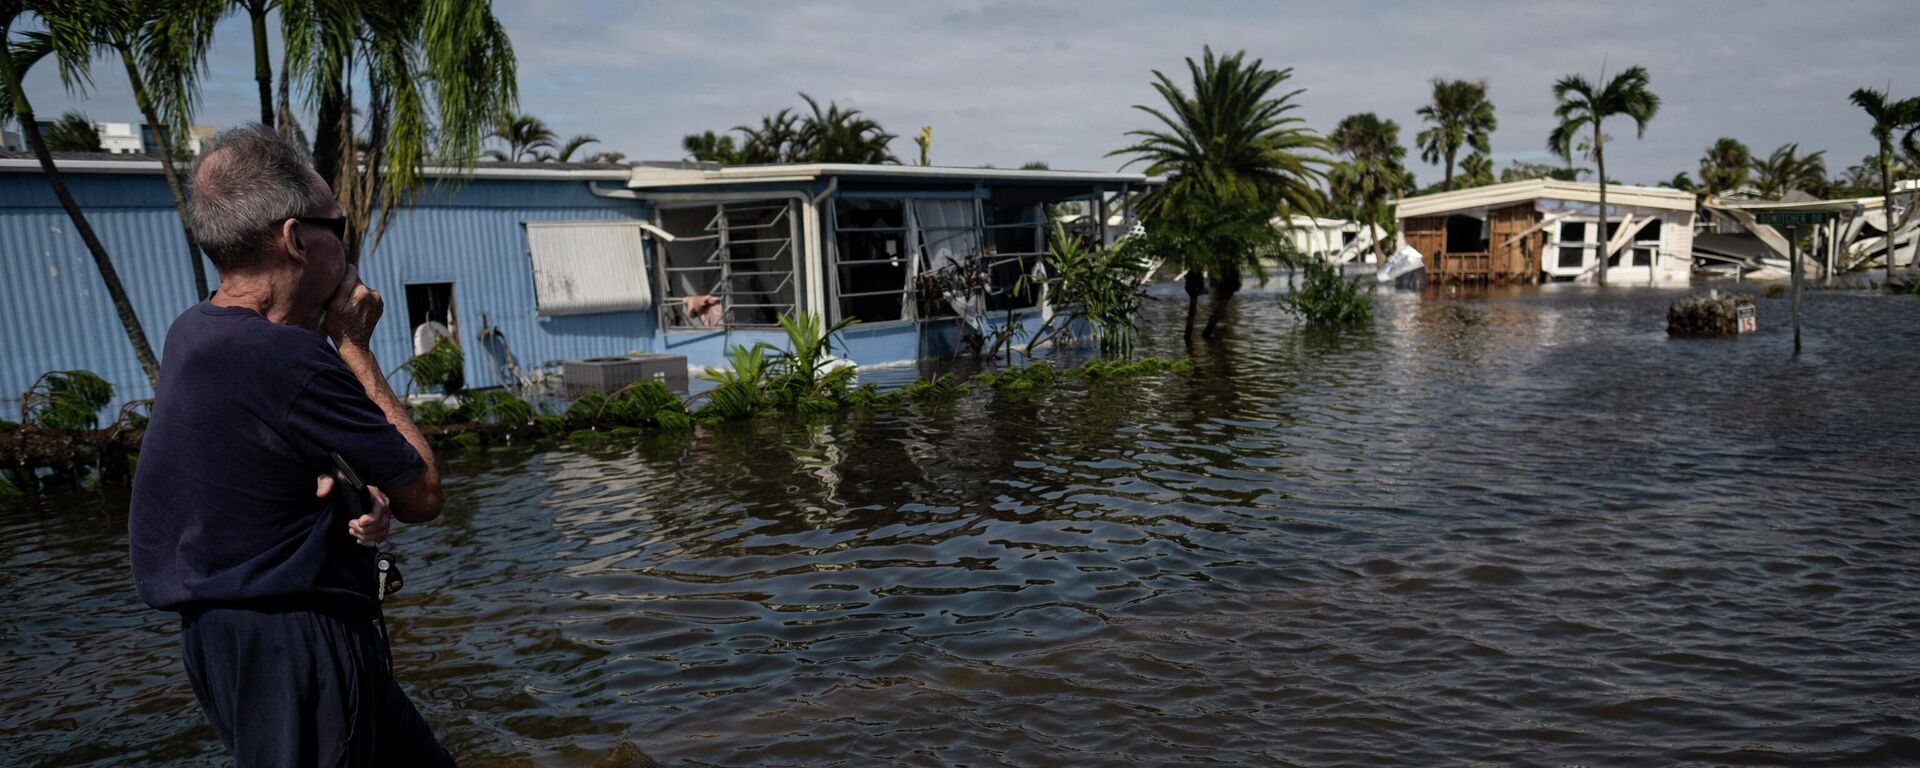 A man looks on from the a flooded street of a neighborhood in Fort Myers, Florida on September 29, 2022. - Hurricane Ian left much of coastal southwest Florida in darkness early on Thursday, bringing catastrophic flooding that left officials readying a huge emergency response to a storm of rare intensity. - Sputnik International, 1920, 01.10.2022